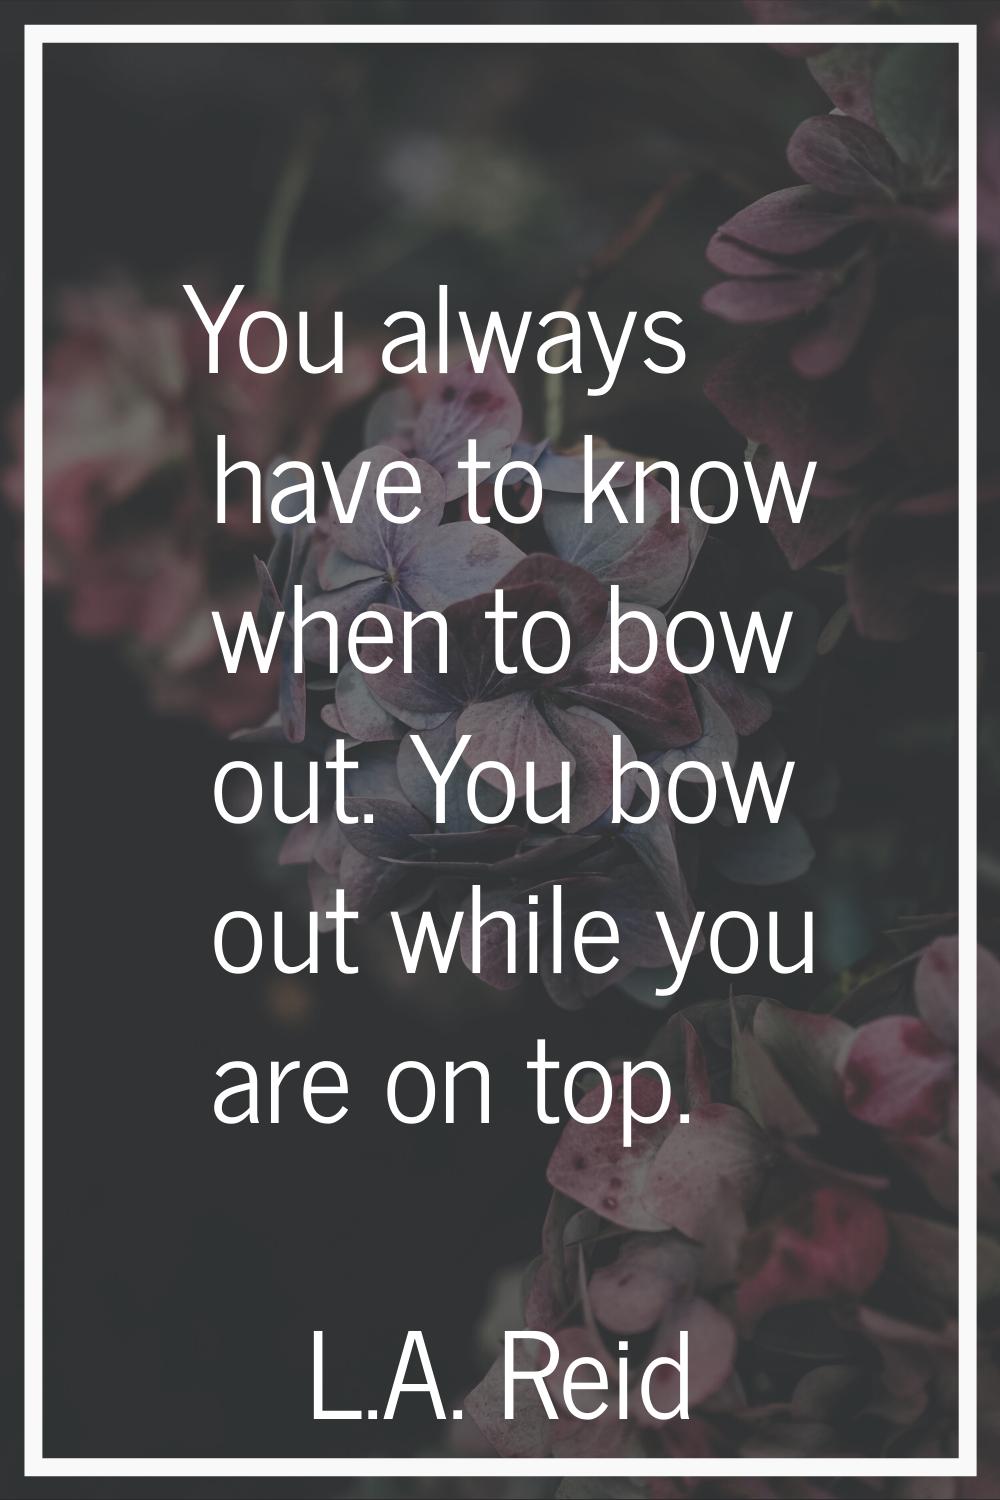 You always have to know when to bow out. You bow out while you are on top.